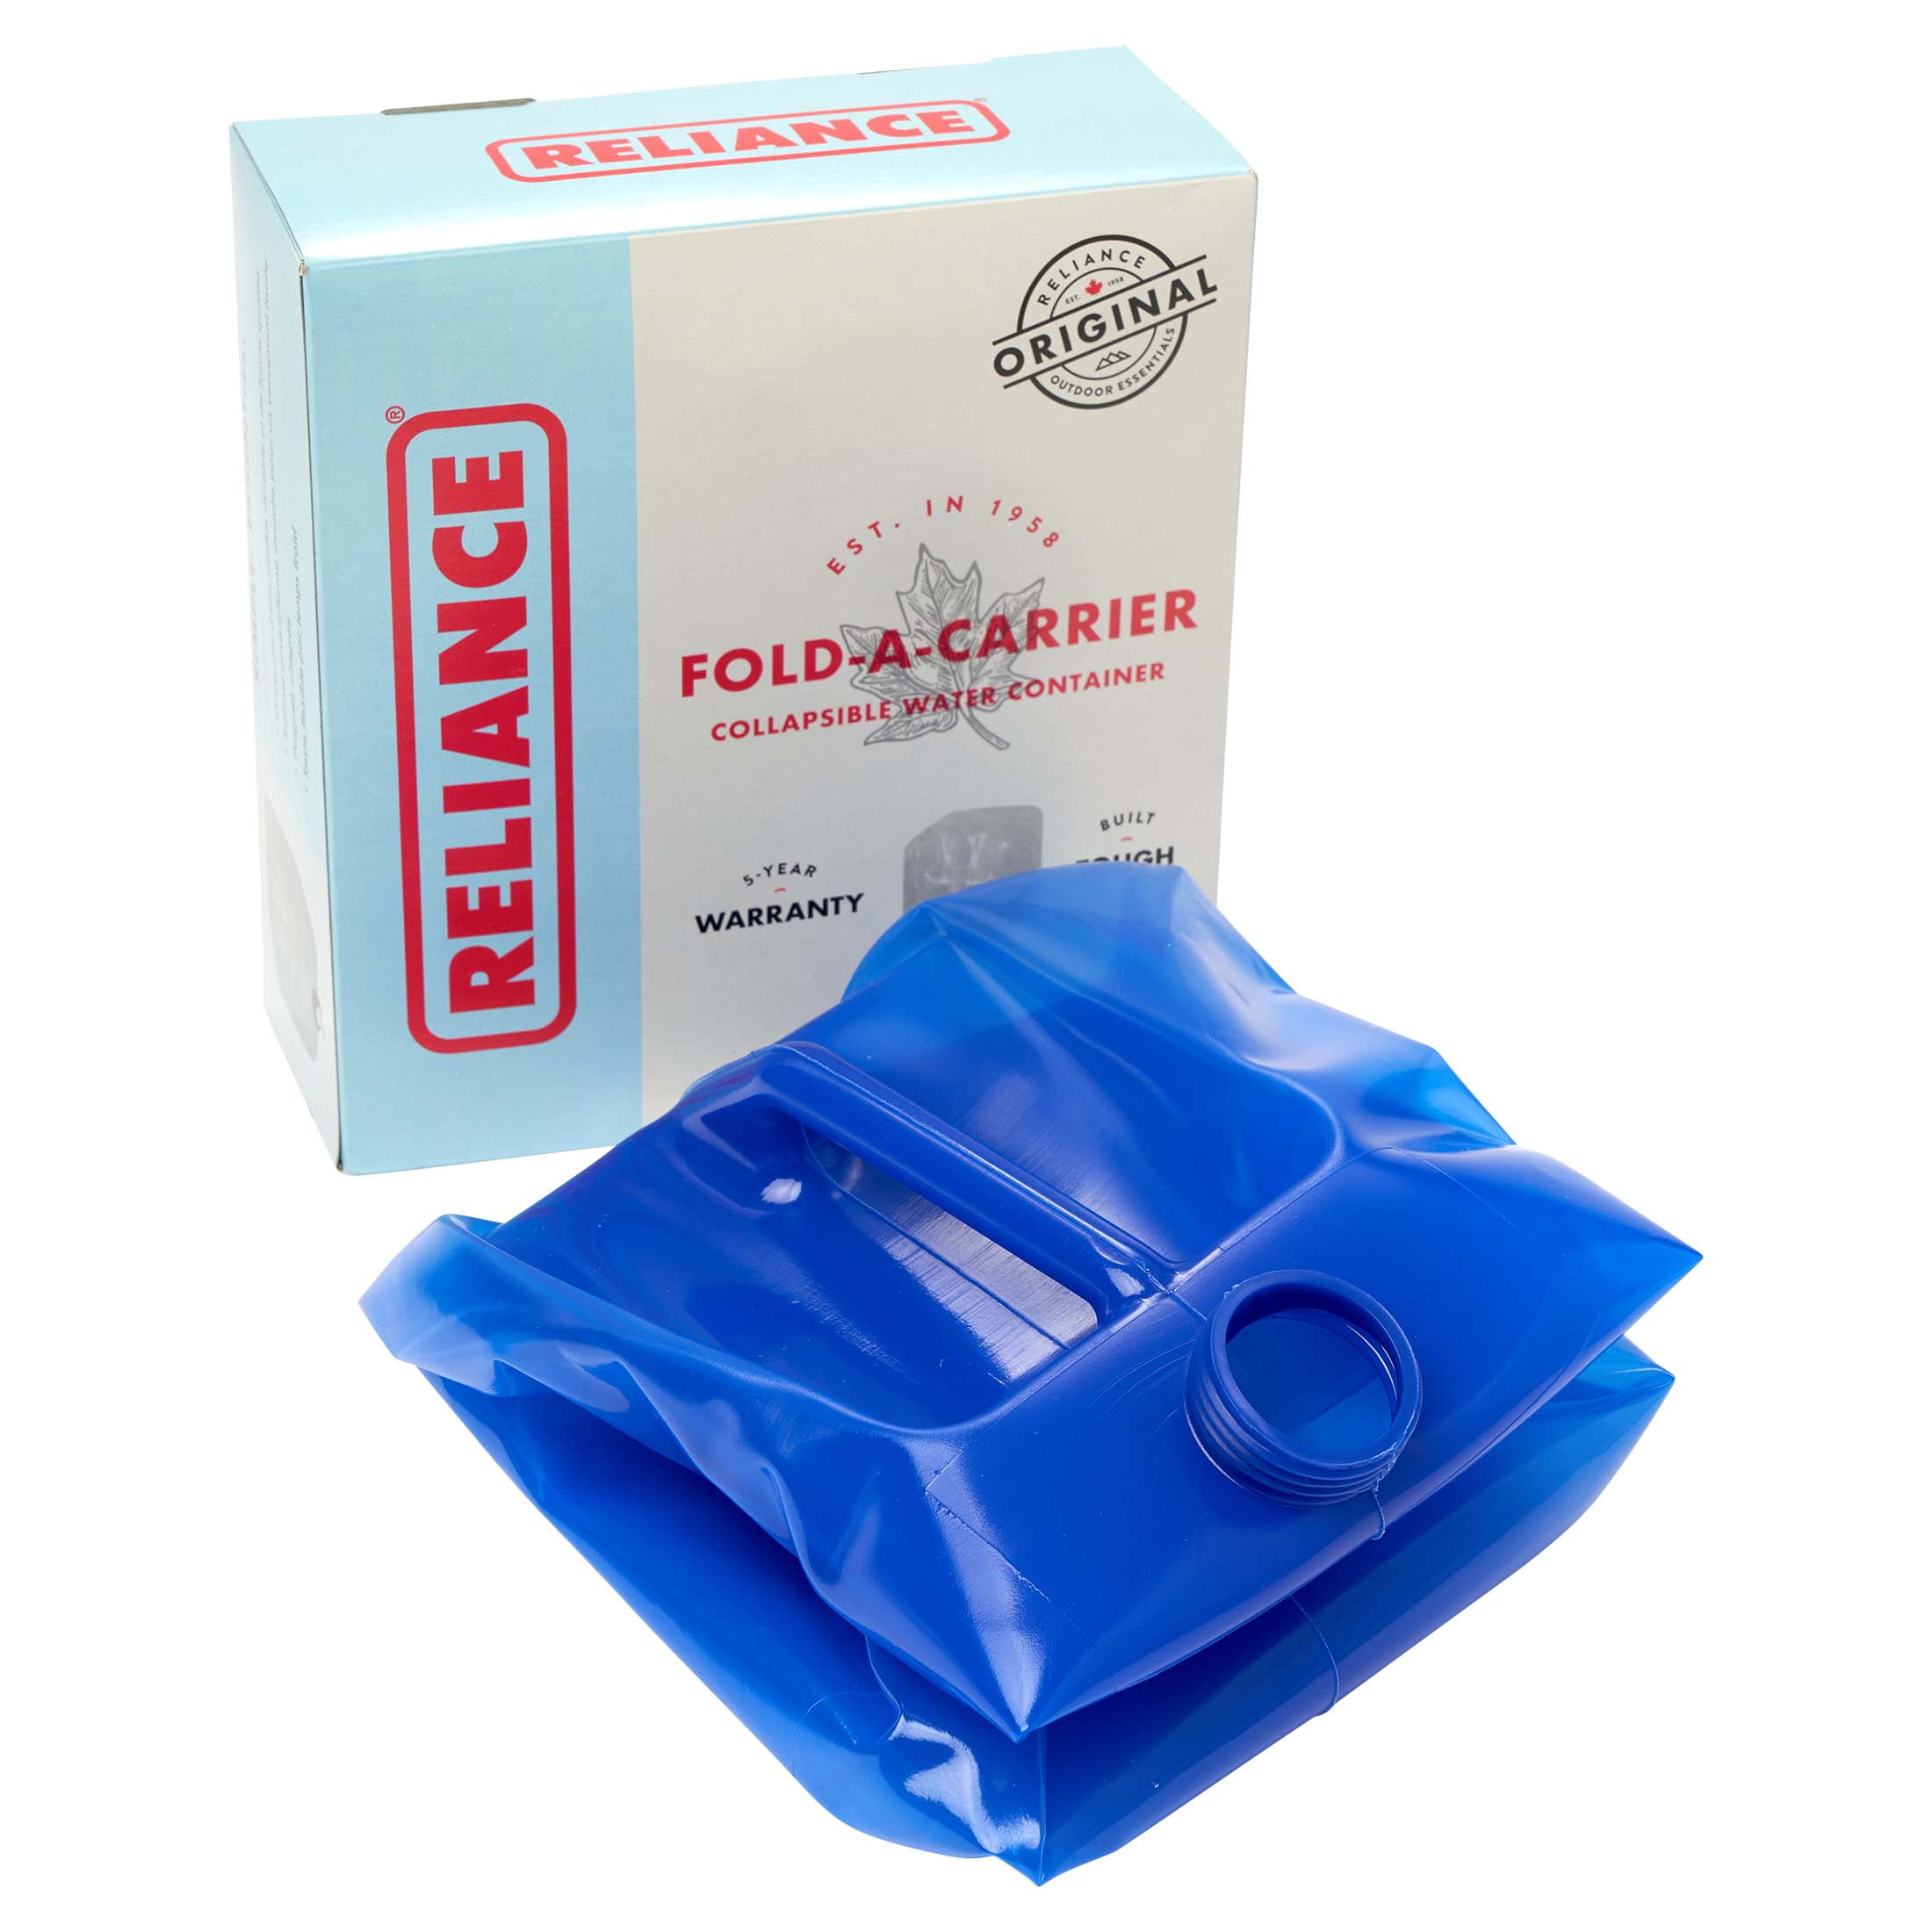 Reliance Fold-A-Carrier Collapsible Water Container - 5 gal.